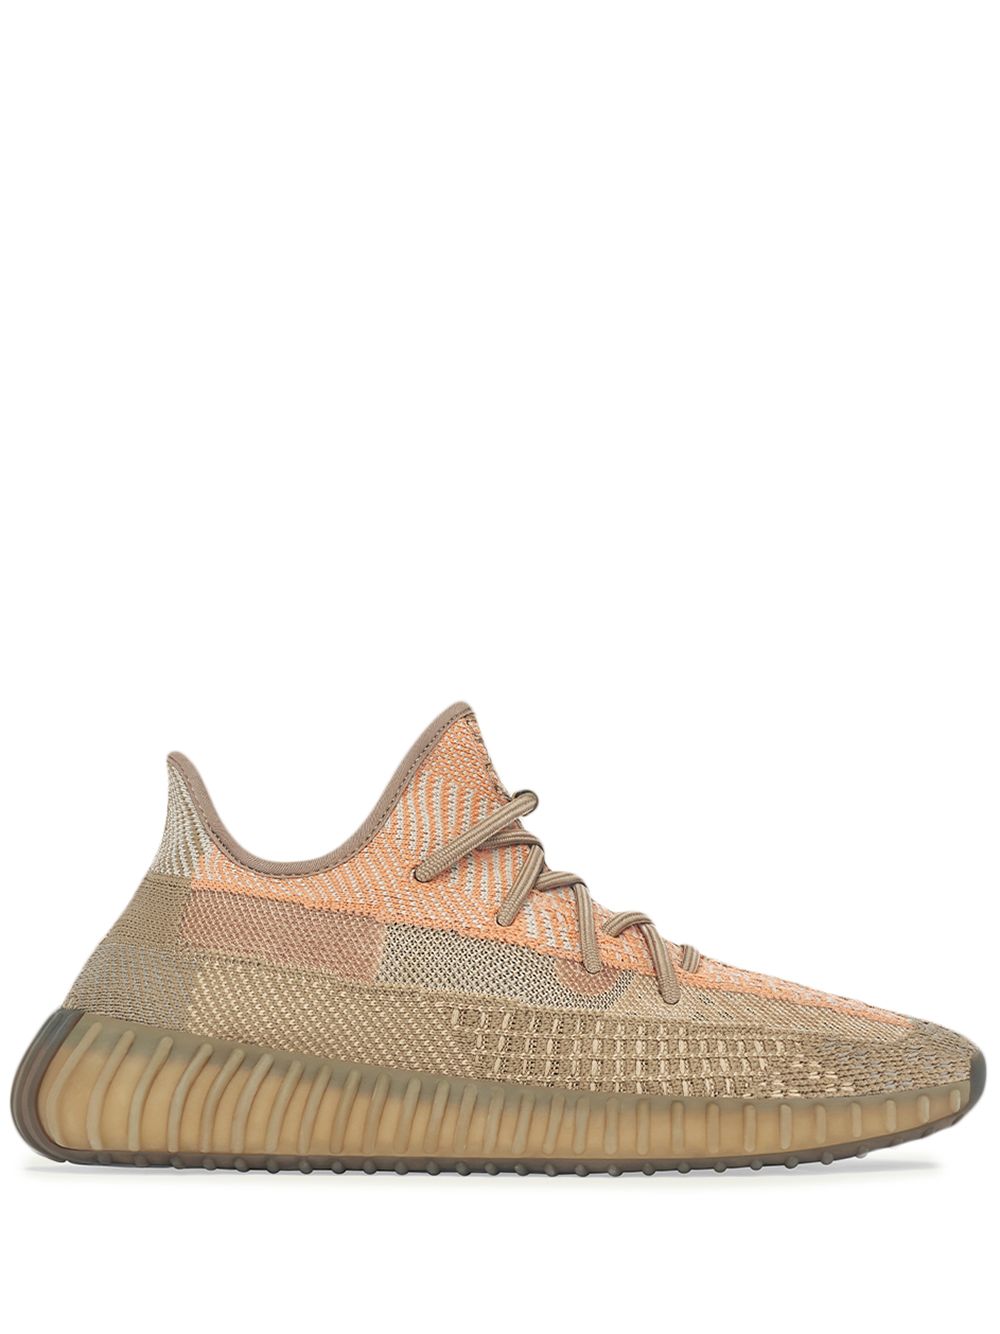 Adidas Yeezy Boost 350 V2 "Sand Taupe" sneakers